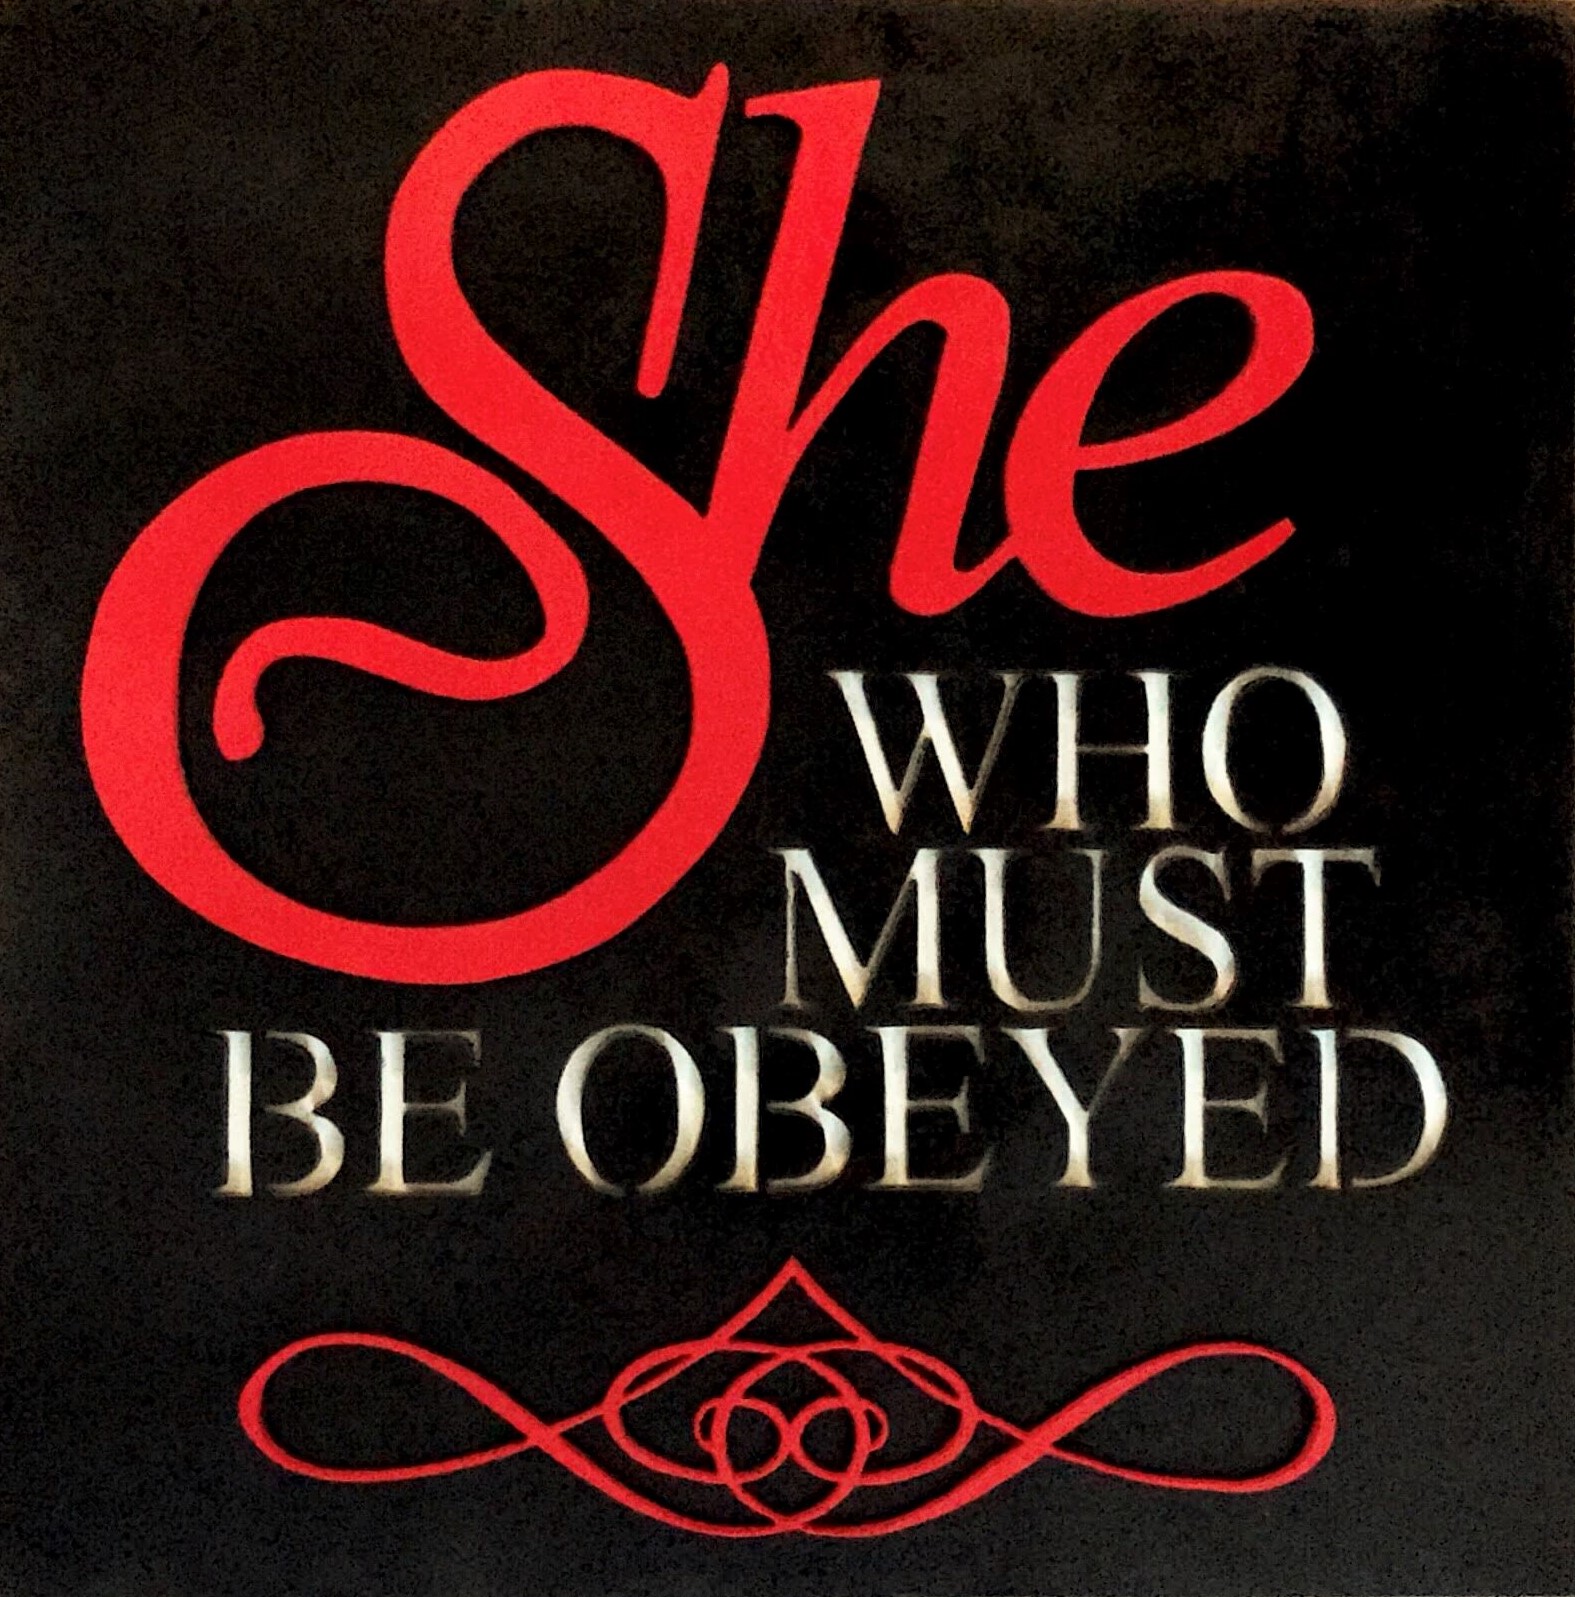 She Who Must be Obeyed